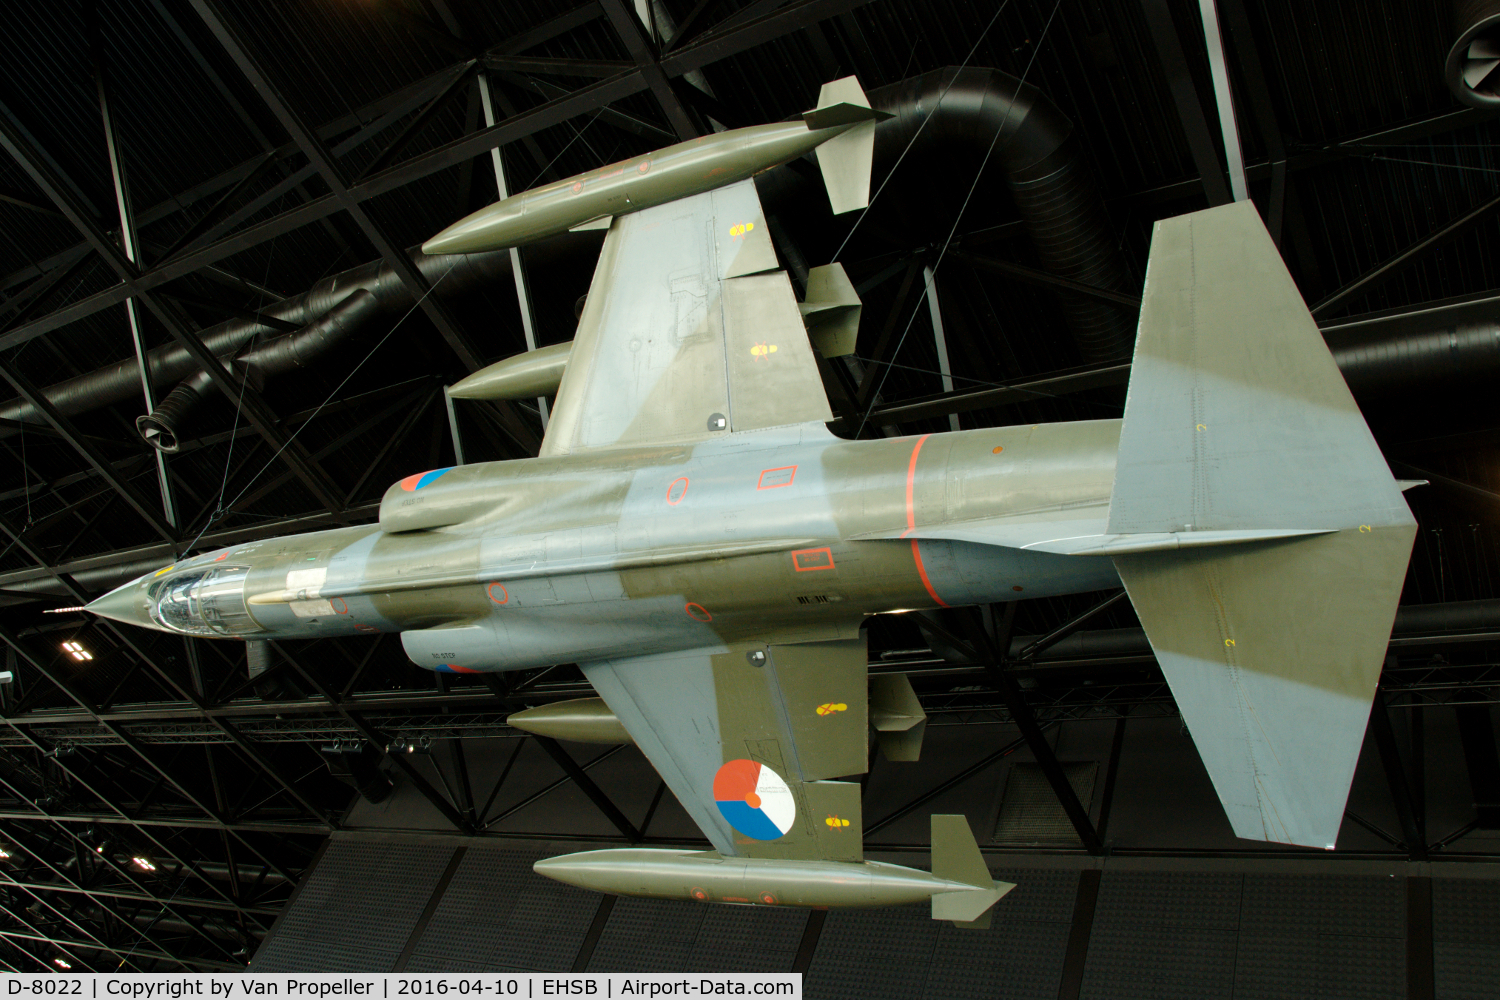 D-8022, Lockheed F-104G Starfighter C/N 683-8022, Lockheed F-104G Starfighter of the Royal Netherlands Air Force suspended upside down from the roof of the National Military Museum in Soesterberg, the Netherlands